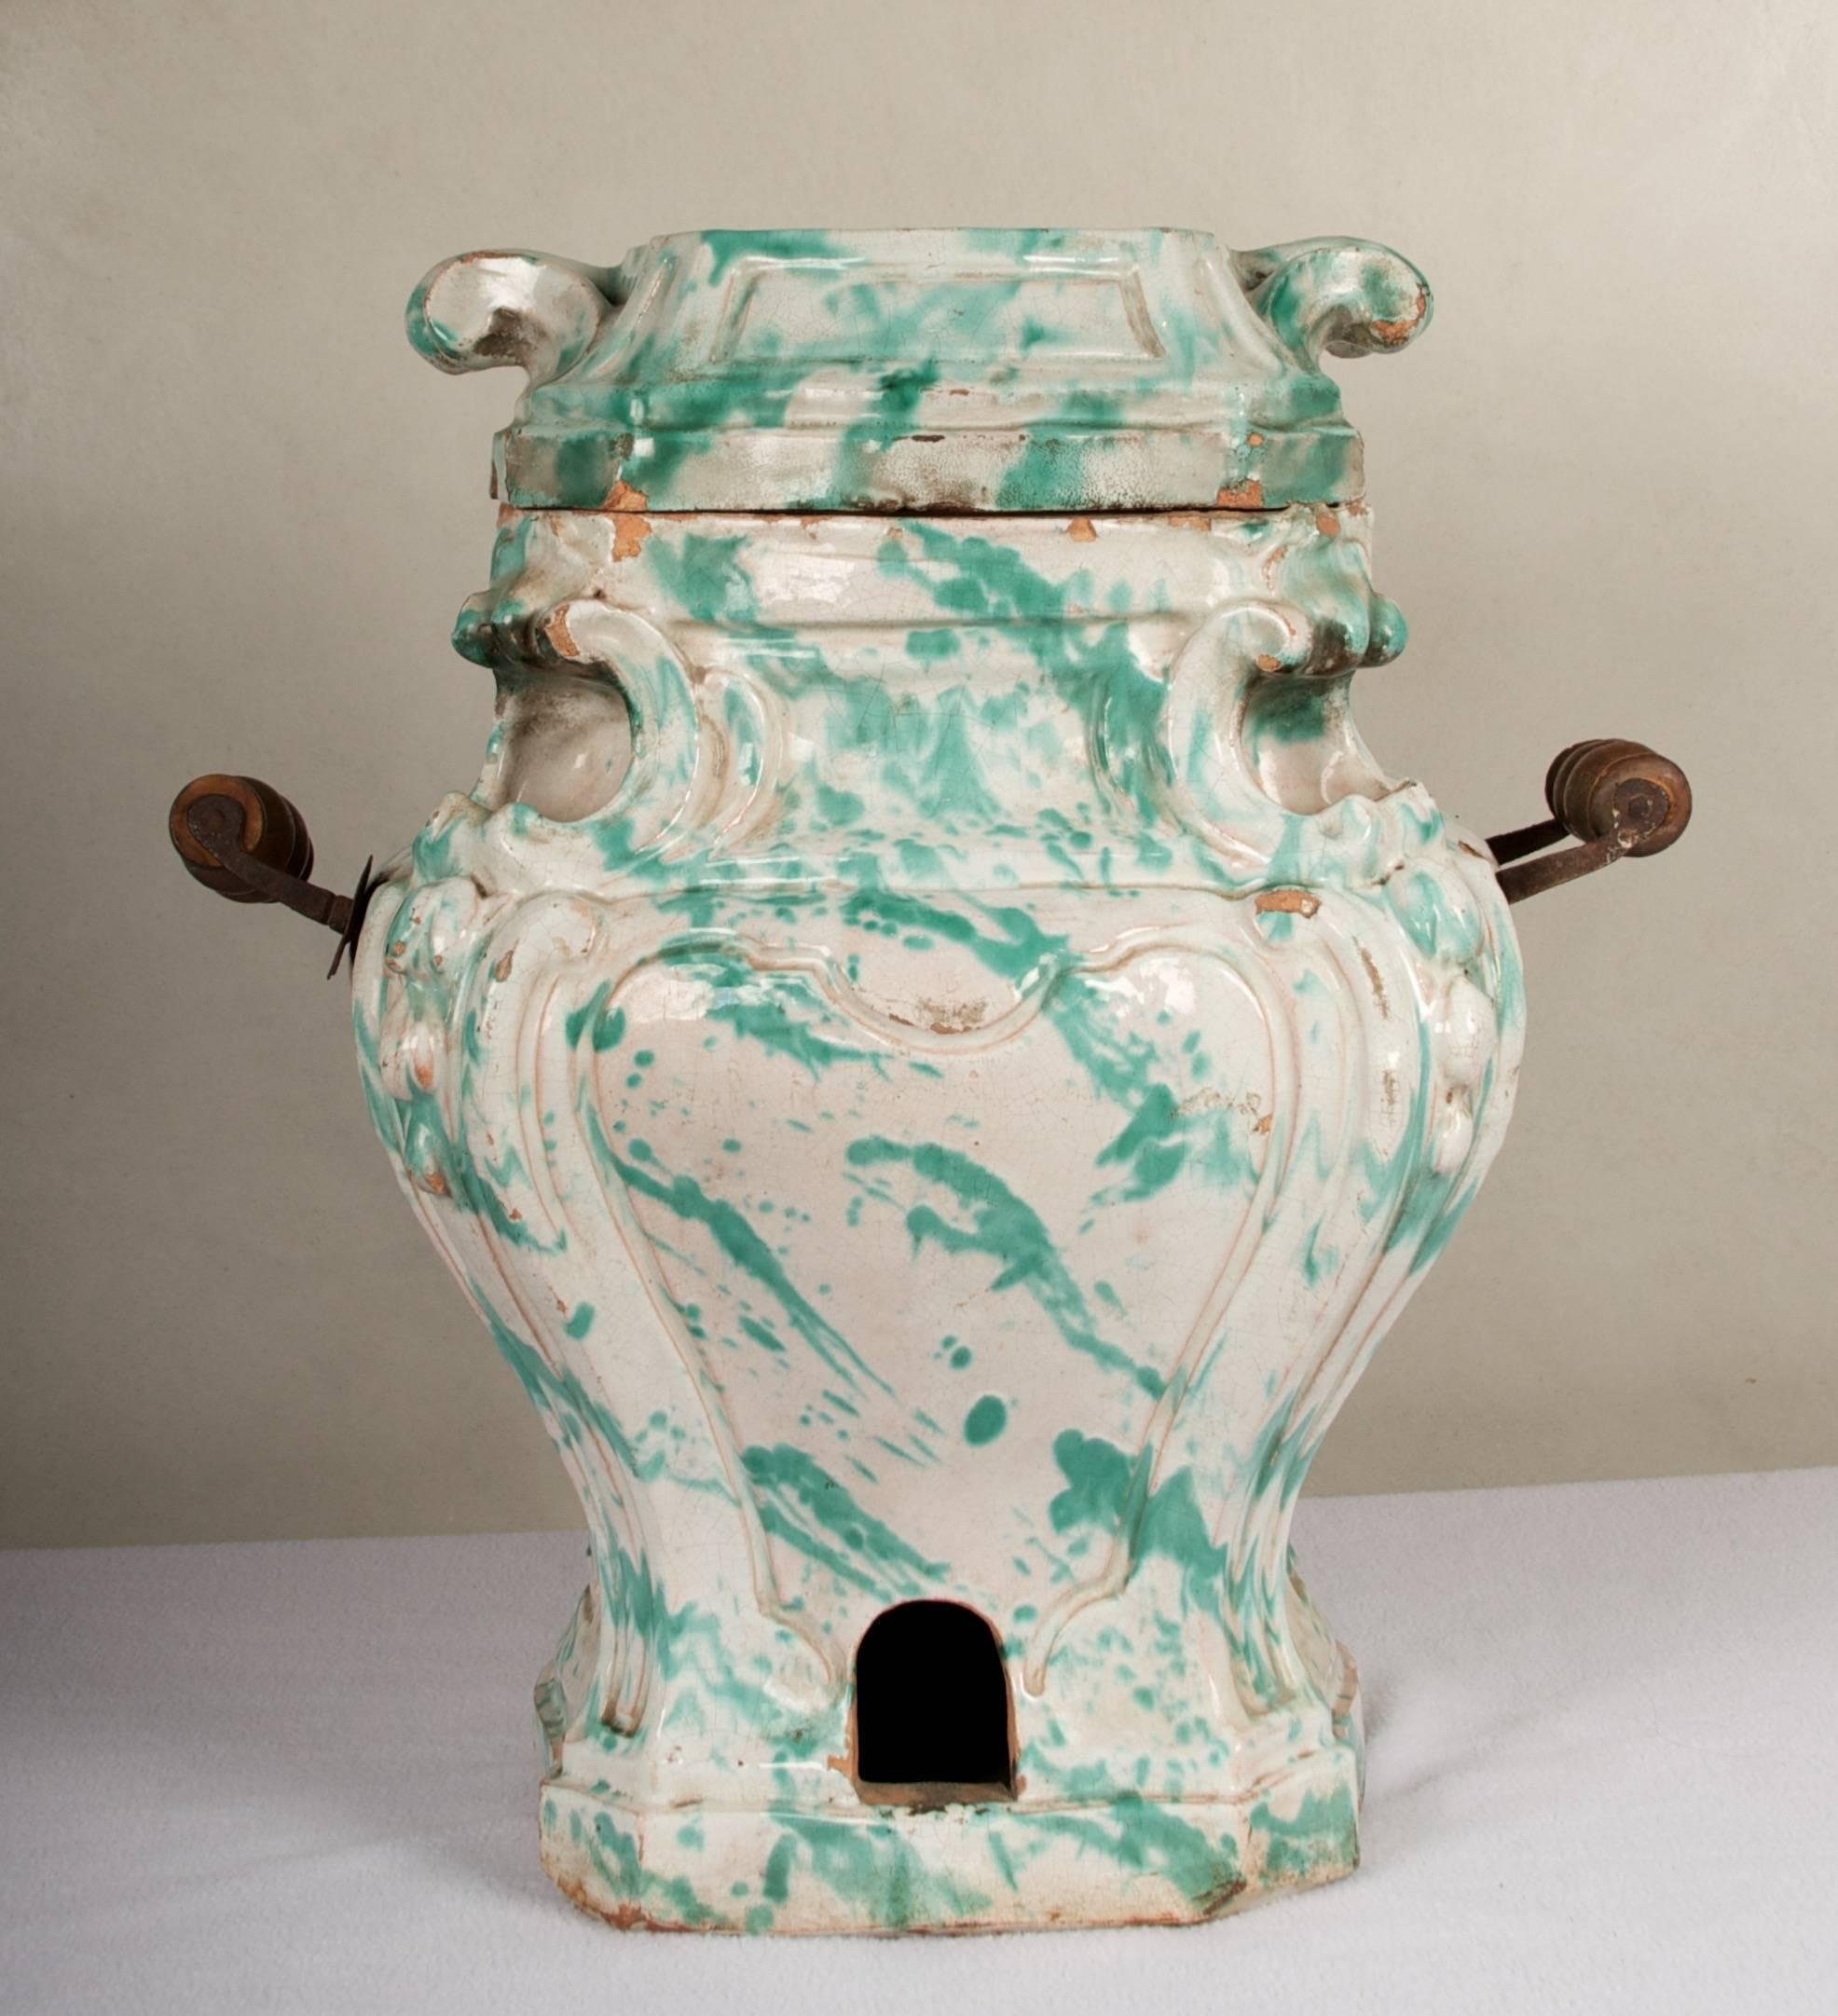 Very rare Rococo chamber warmer, of French or Austrian origin.
There are simply not many of these coal pot's remaining, due to the fact
that they were very utilitarian, and being glazed terra cotta, they are 
somewhat fragile and even though in